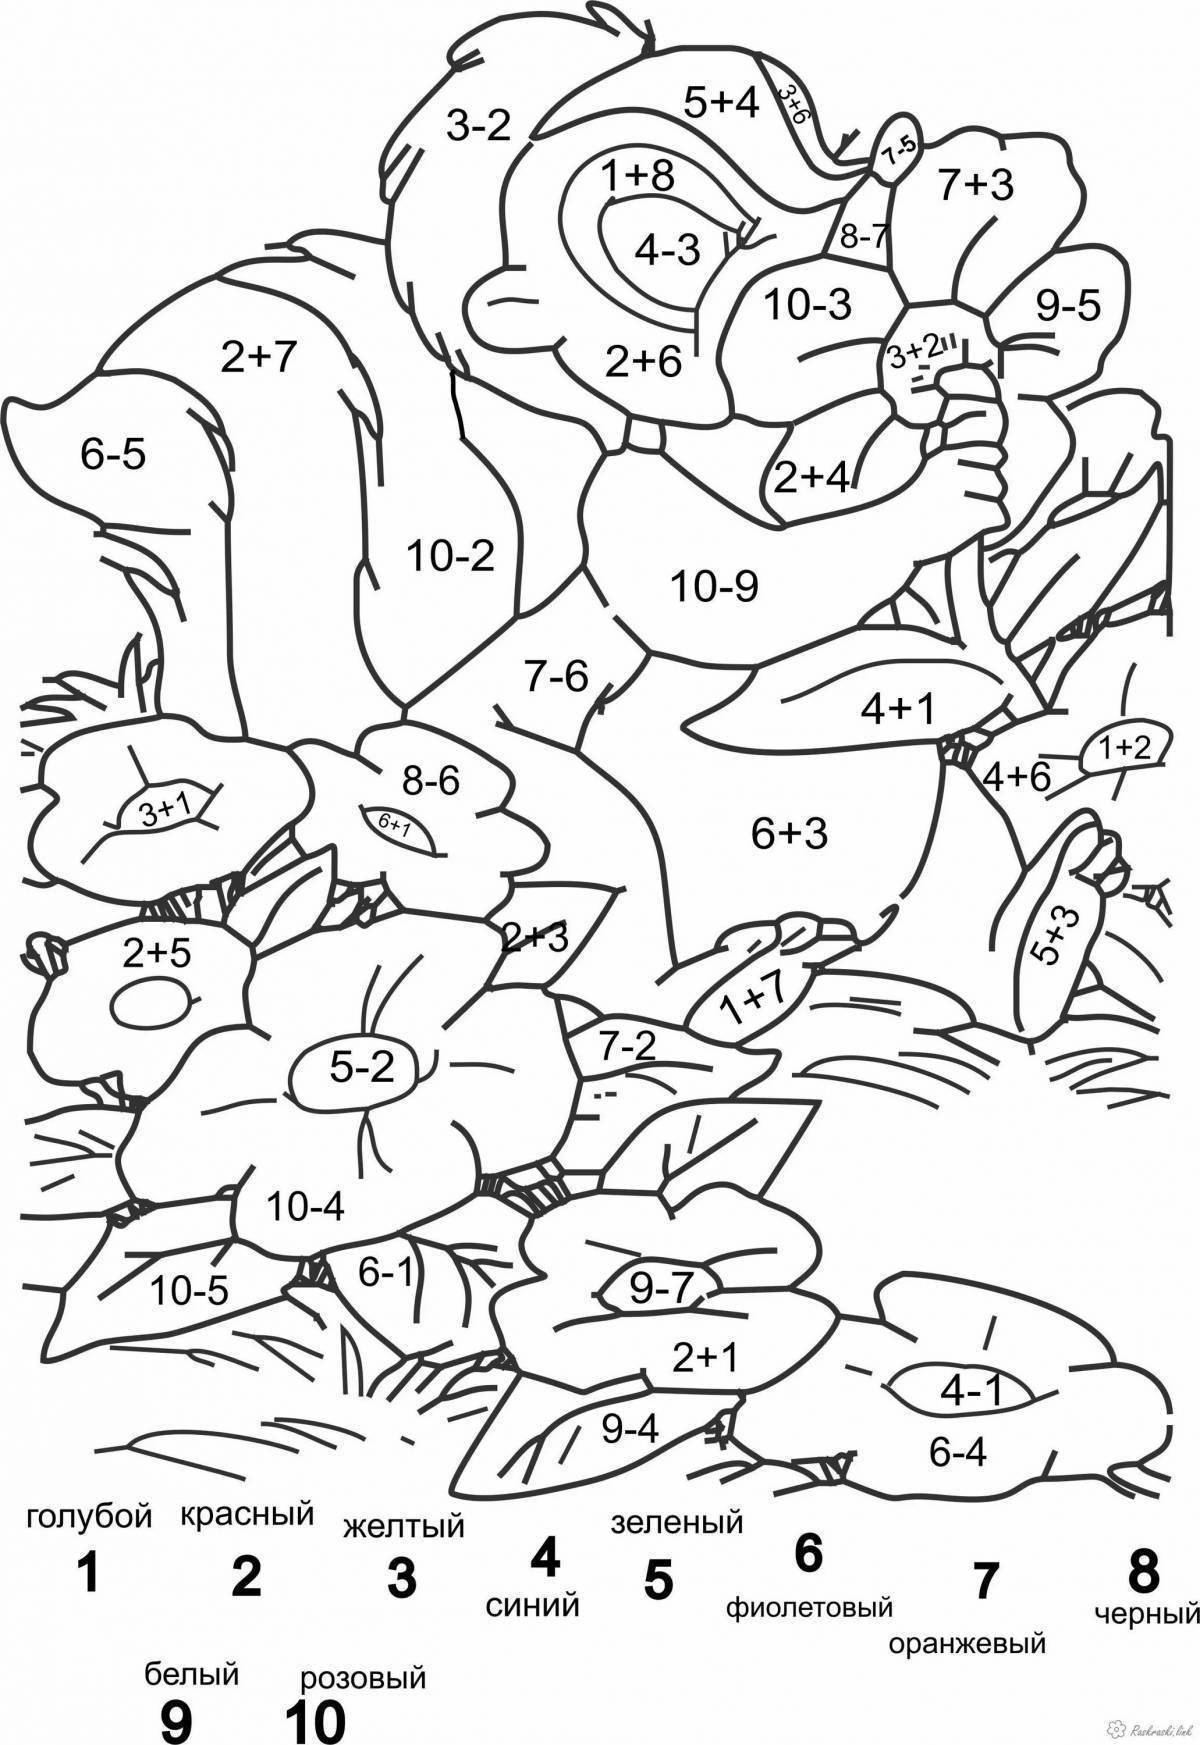 Fun coloring by numbers for 7 year olds with arithmetic examples